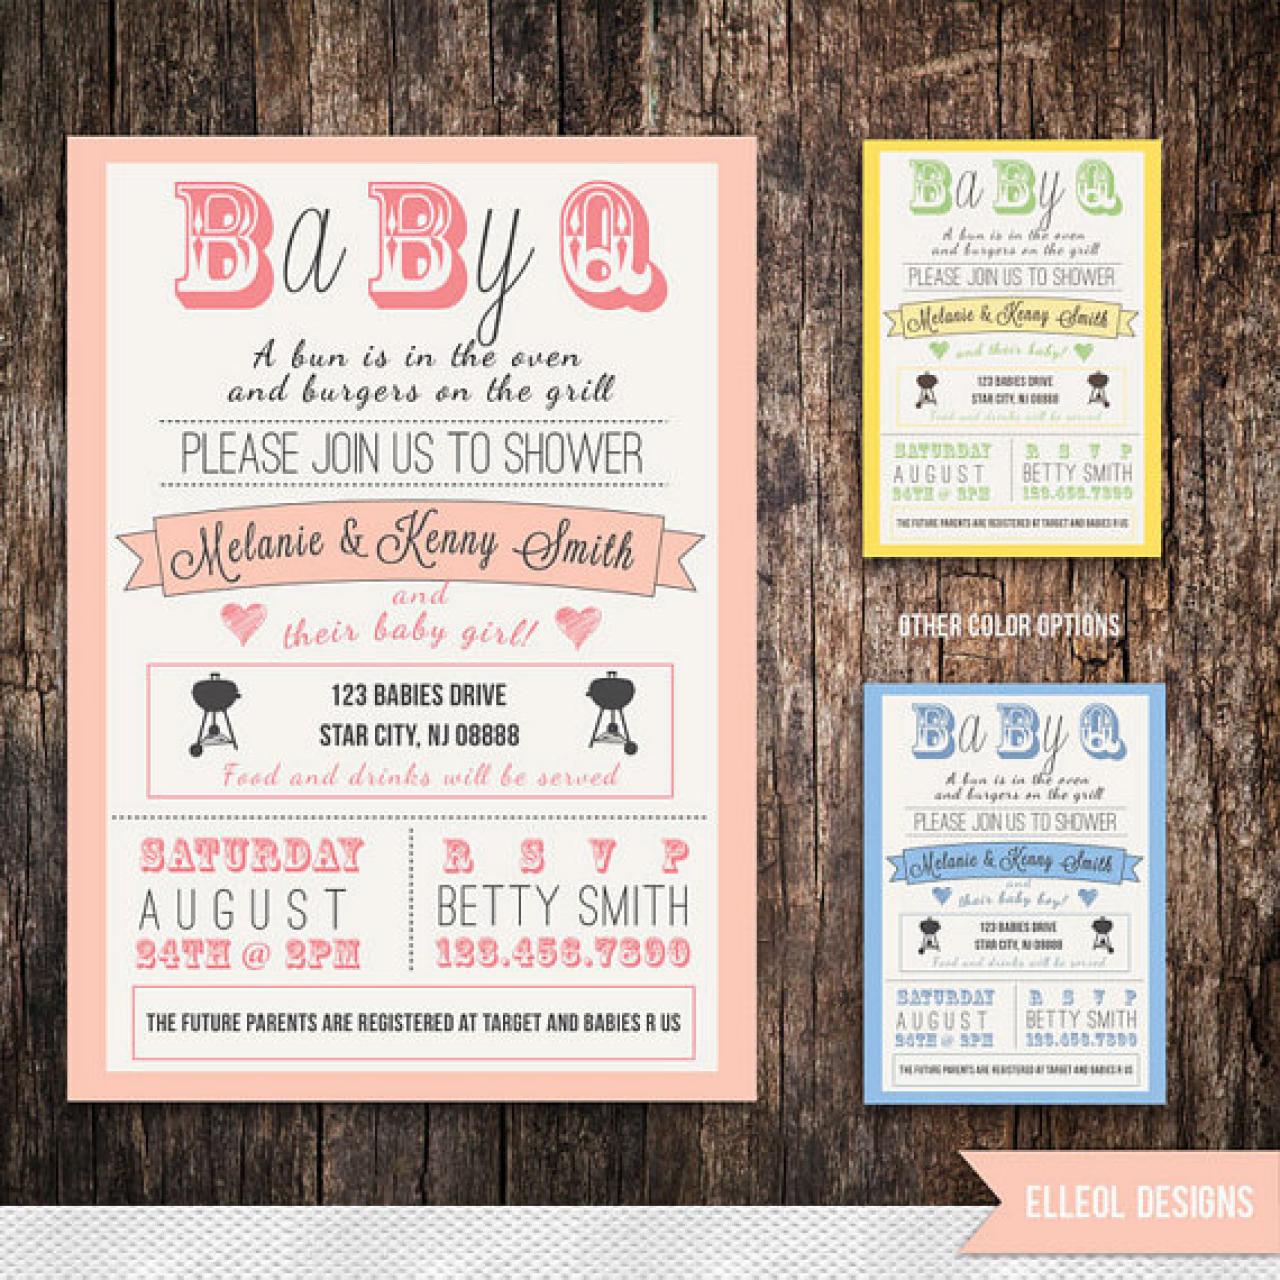 DIY Co-ed Baby Shower Ideas  DIY Network Blog: Made + Remade  DIY Throughout Baby Shower Agenda Template